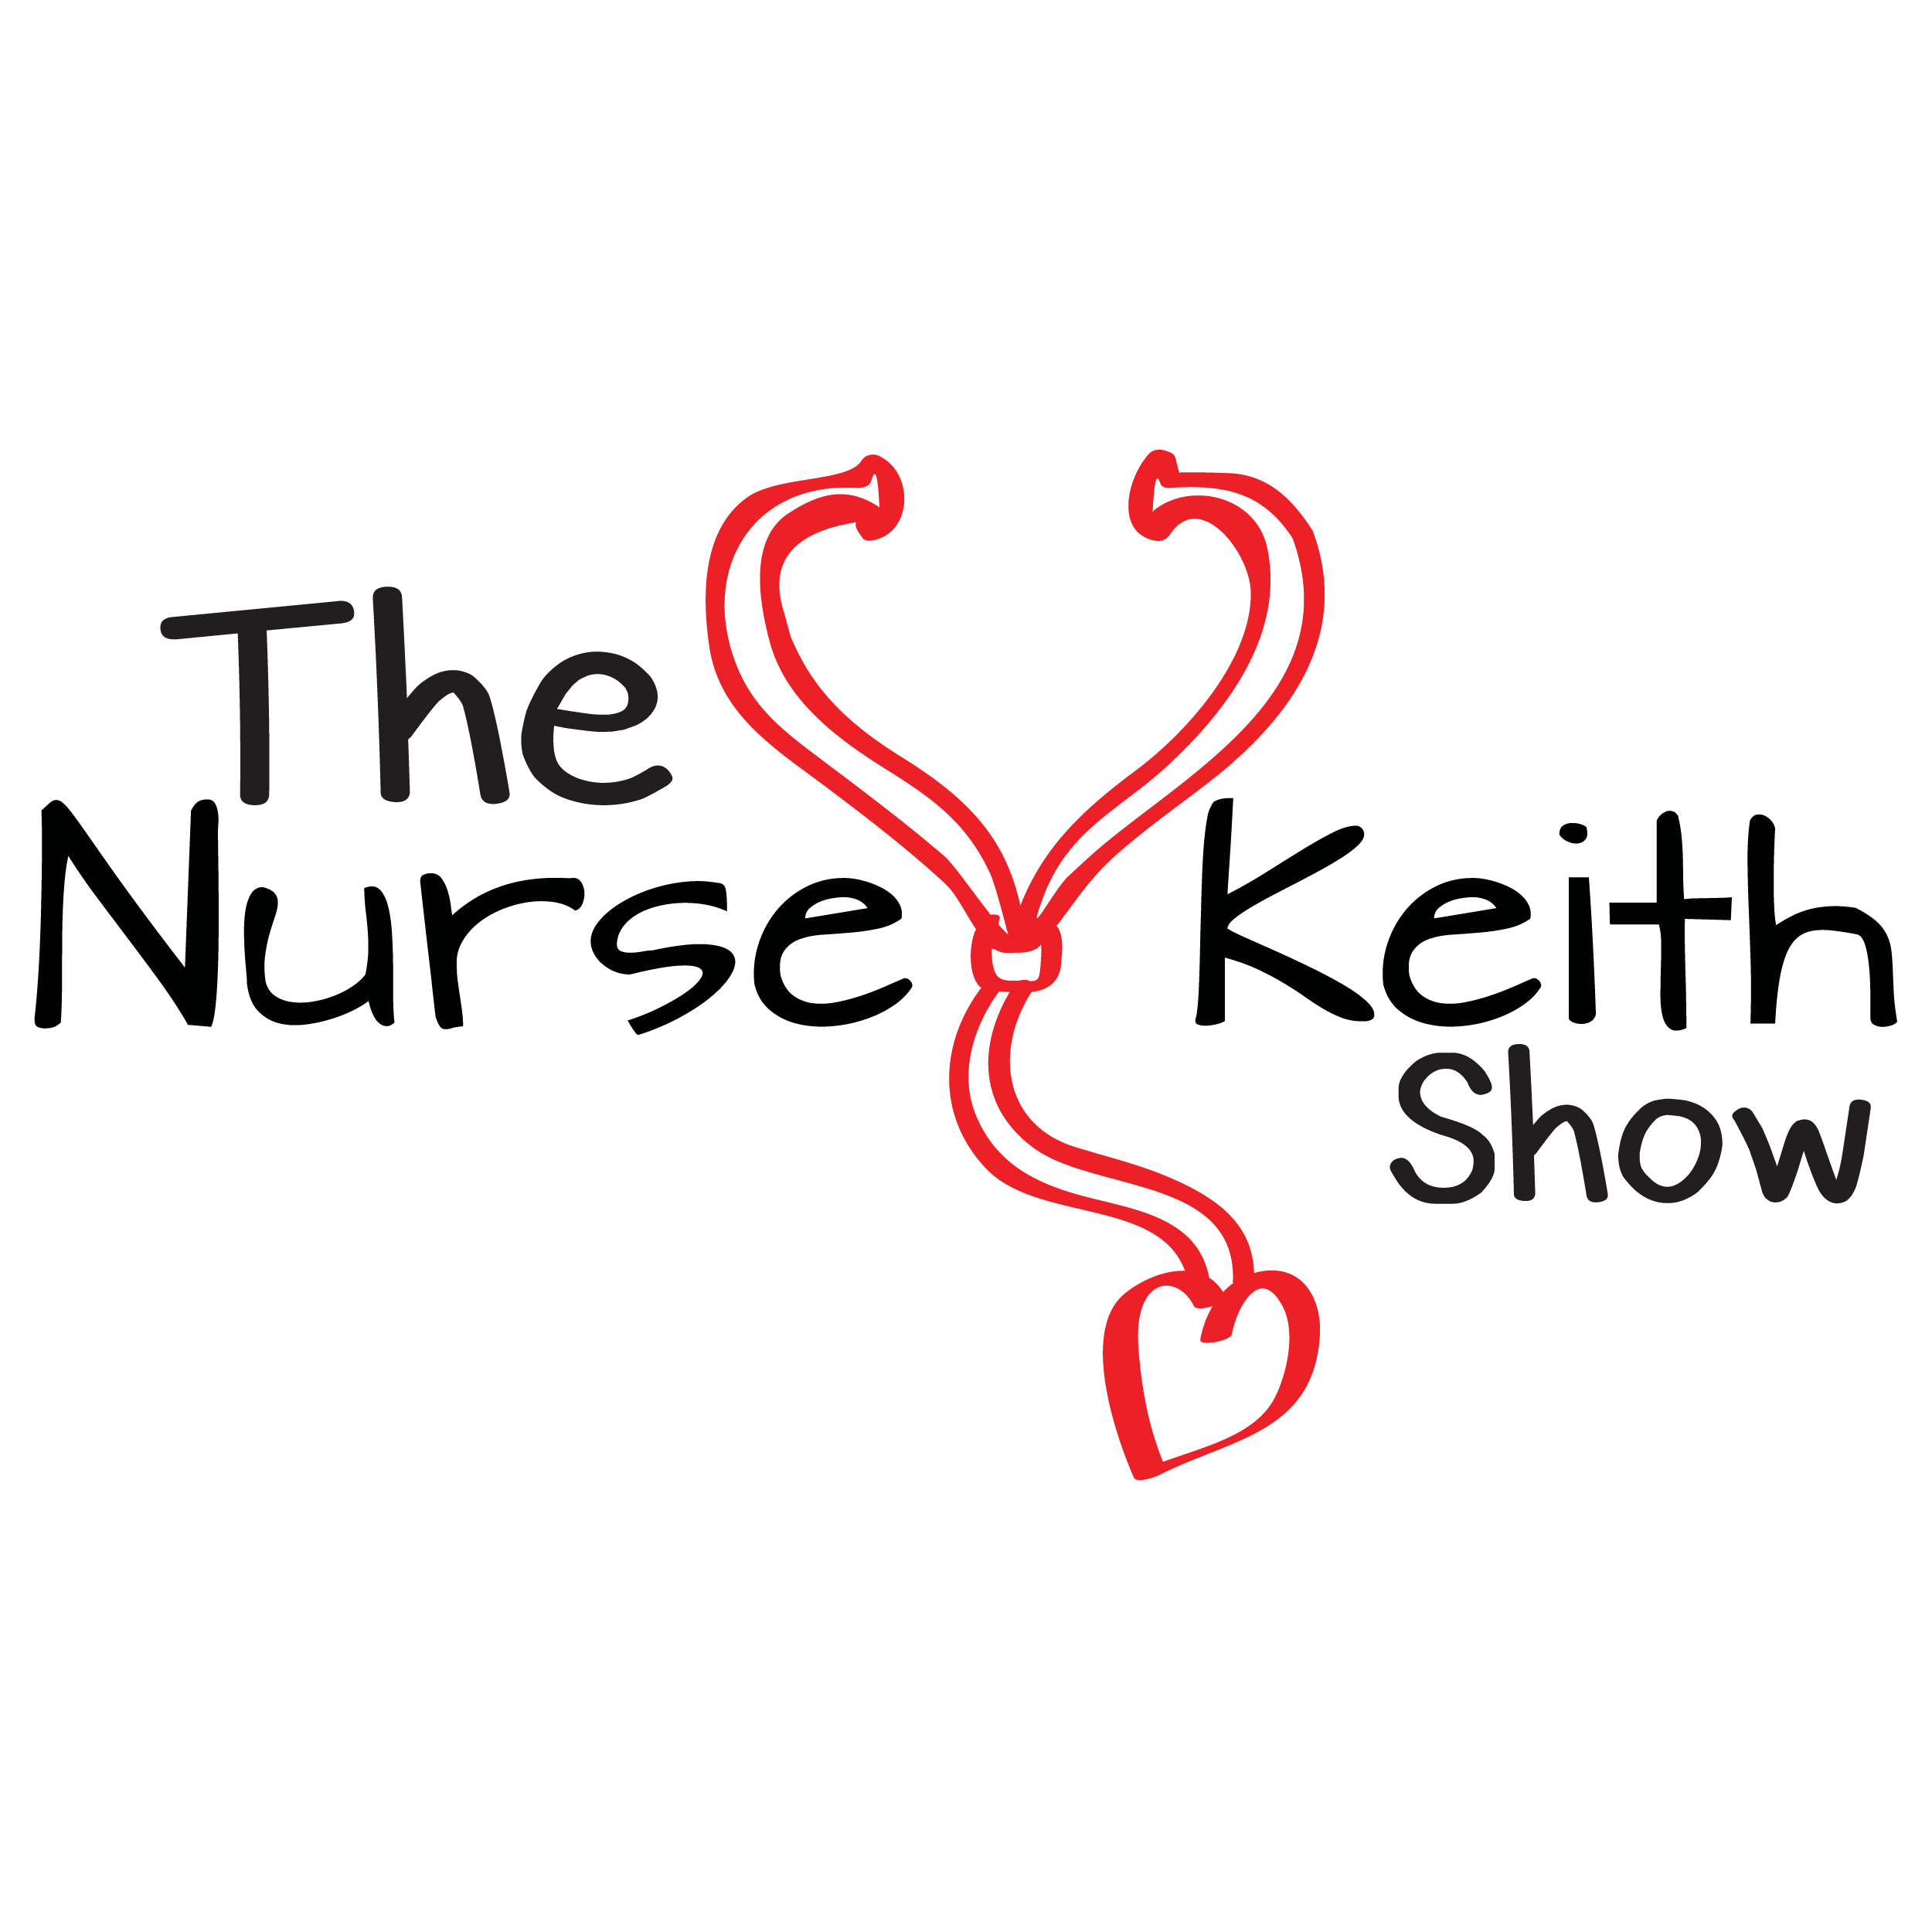 The Crucial Importance of Evidence-Based Information in the Age of COVID-19 | The Nurse Keith Show